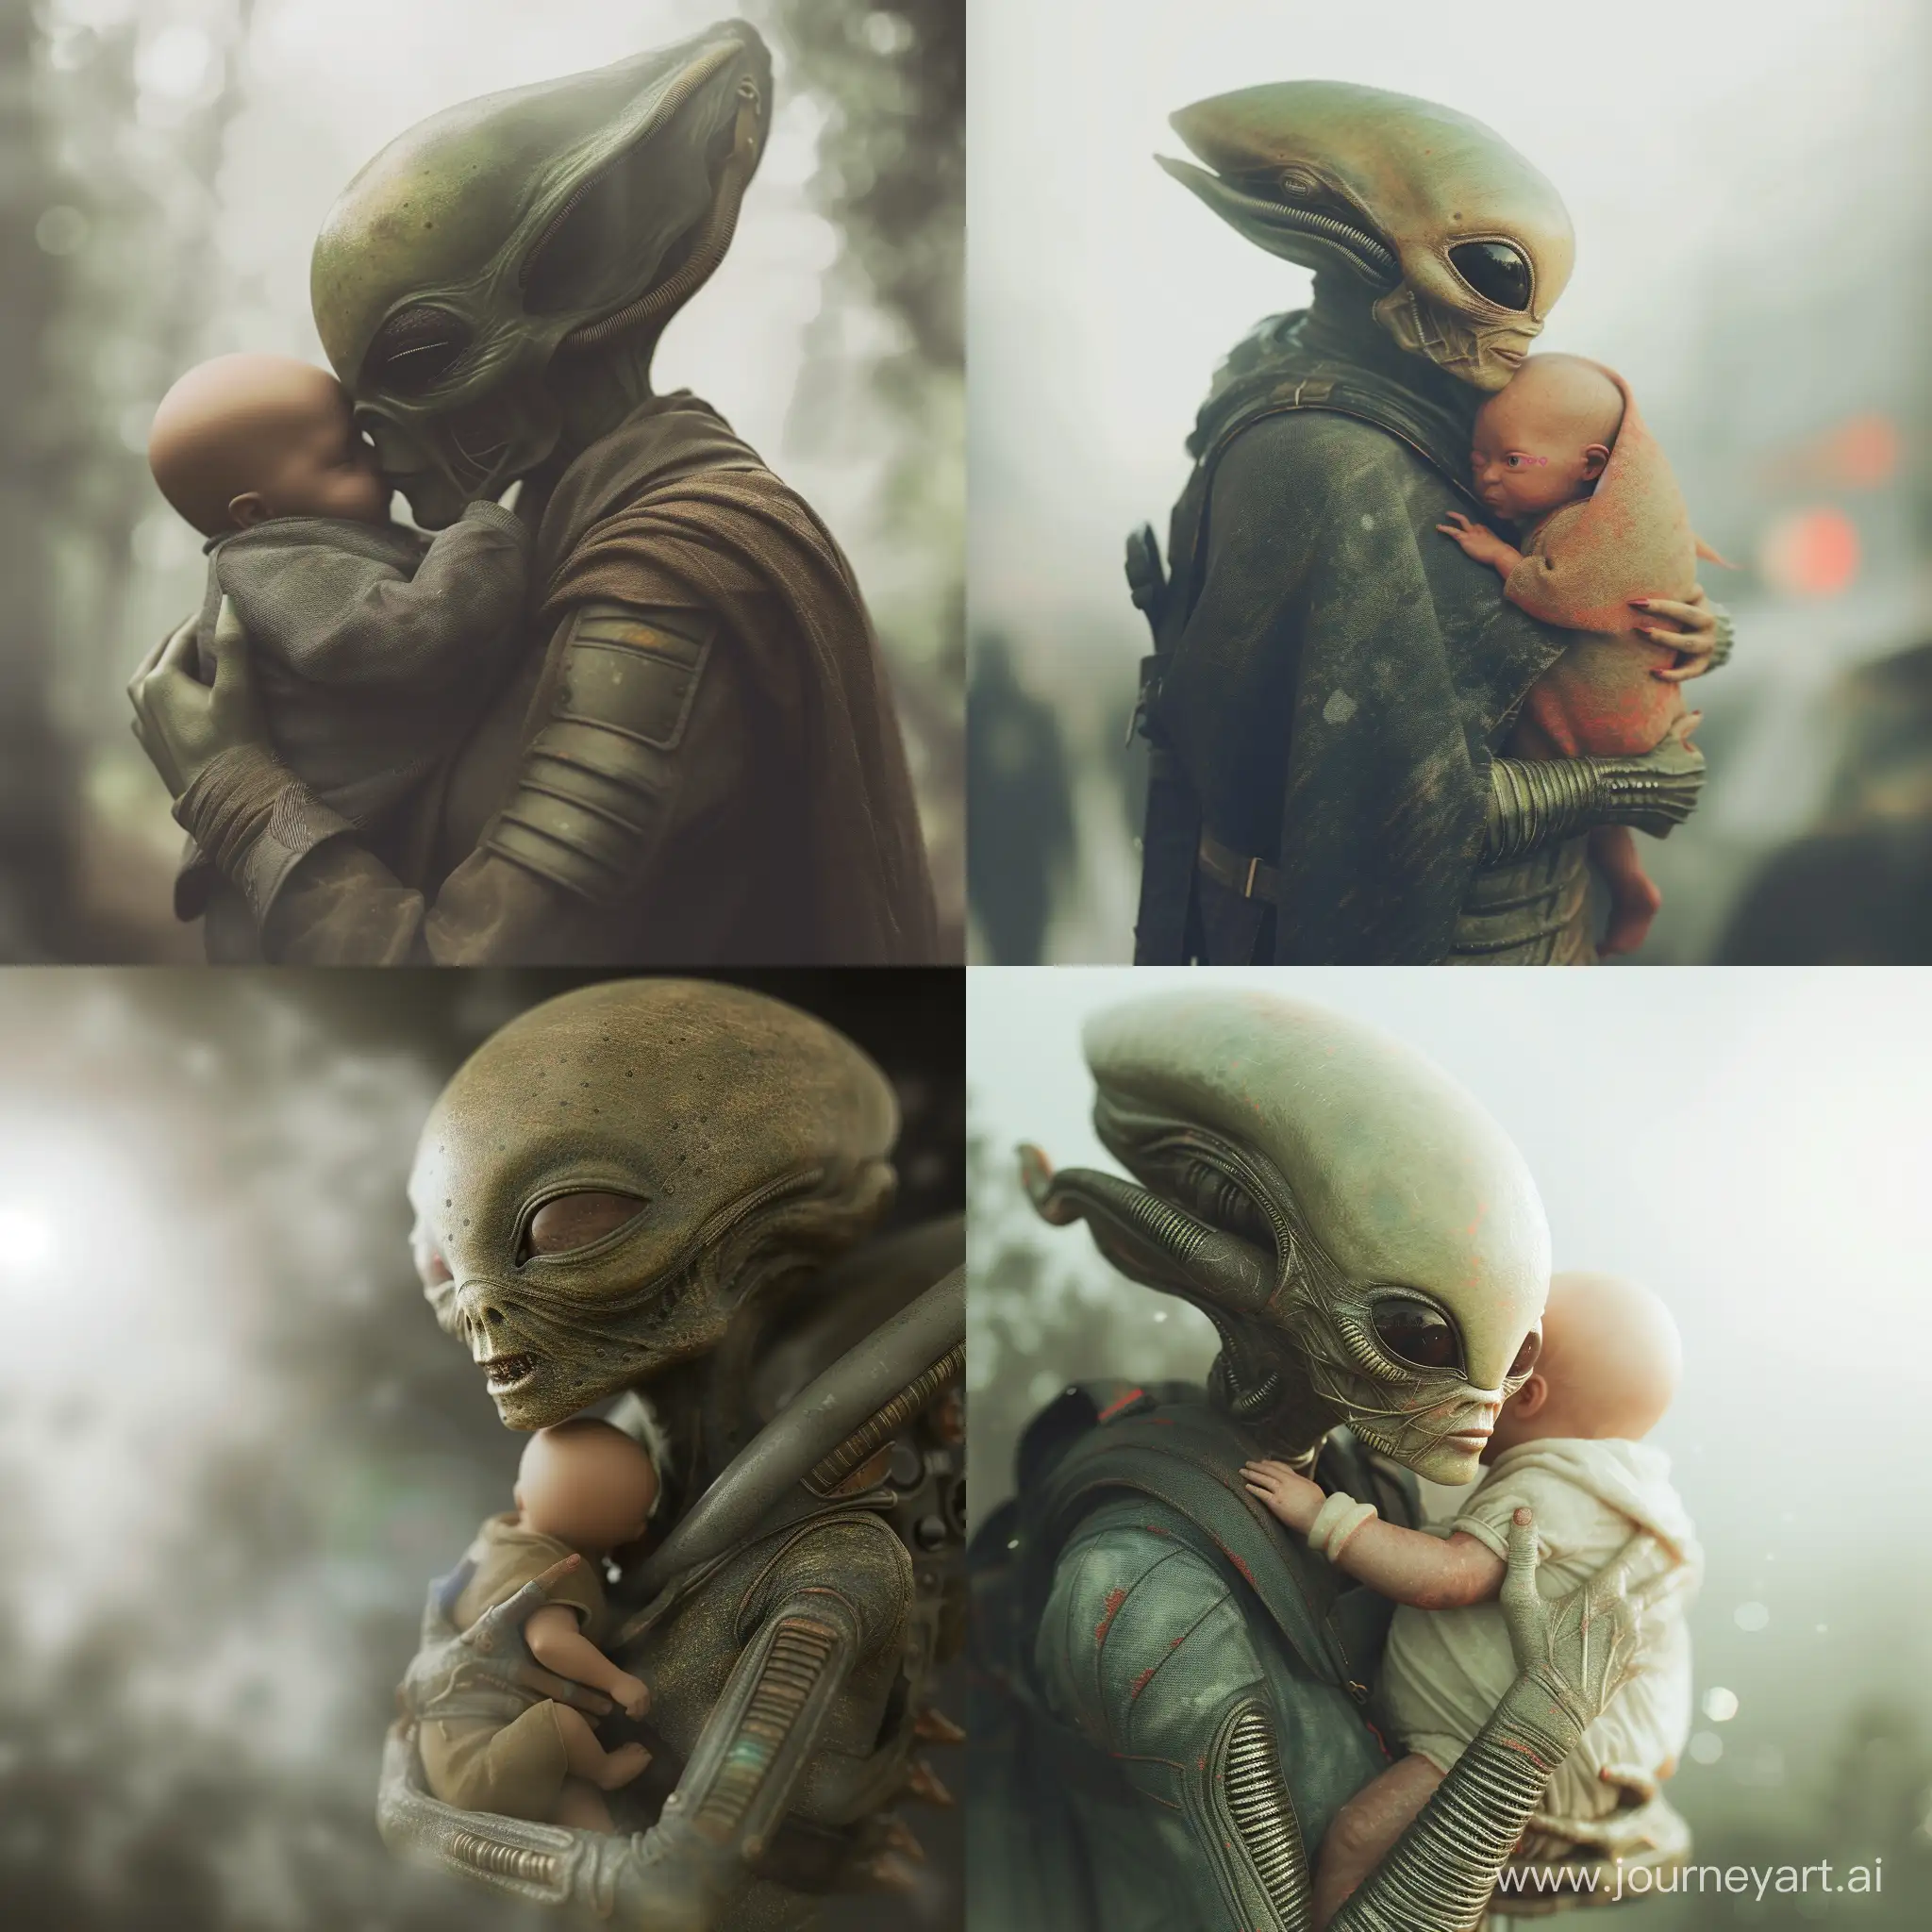 Heartwarming-Alien-Embrace-Extraterrestrial-Love-with-Human-Baby